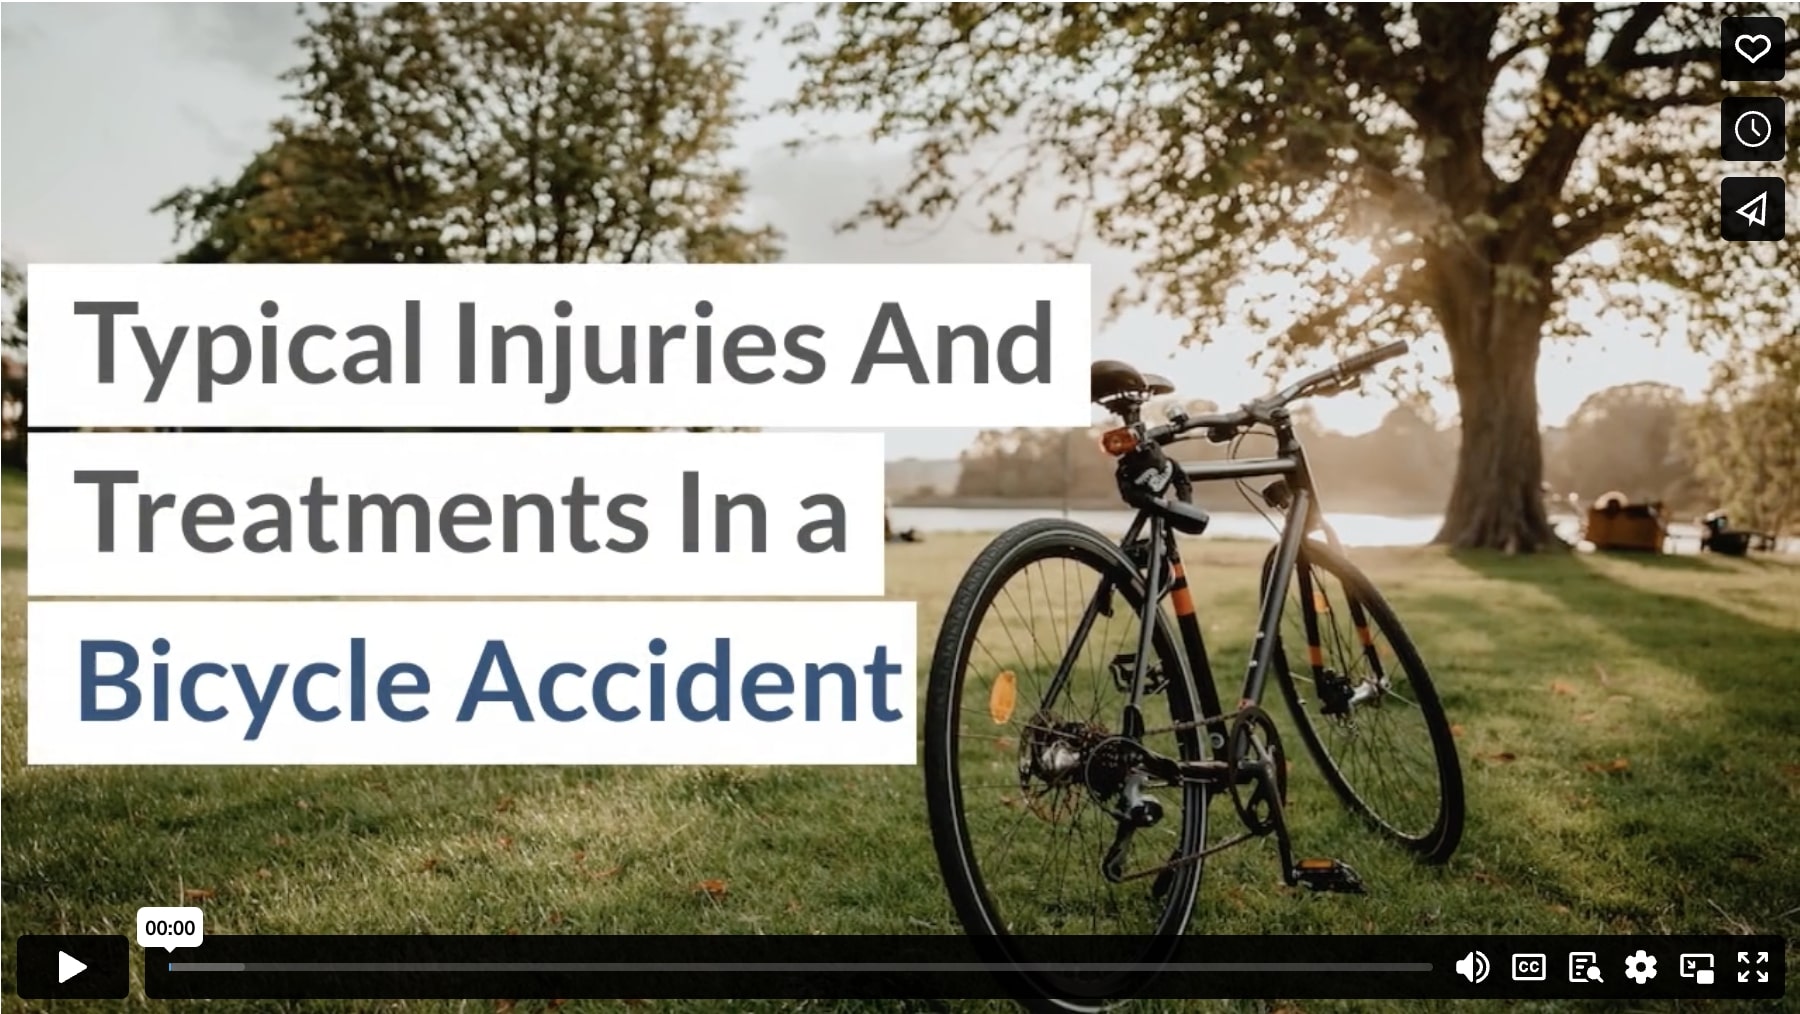 Typical Injuries And Treatments In a Bicycle Accident